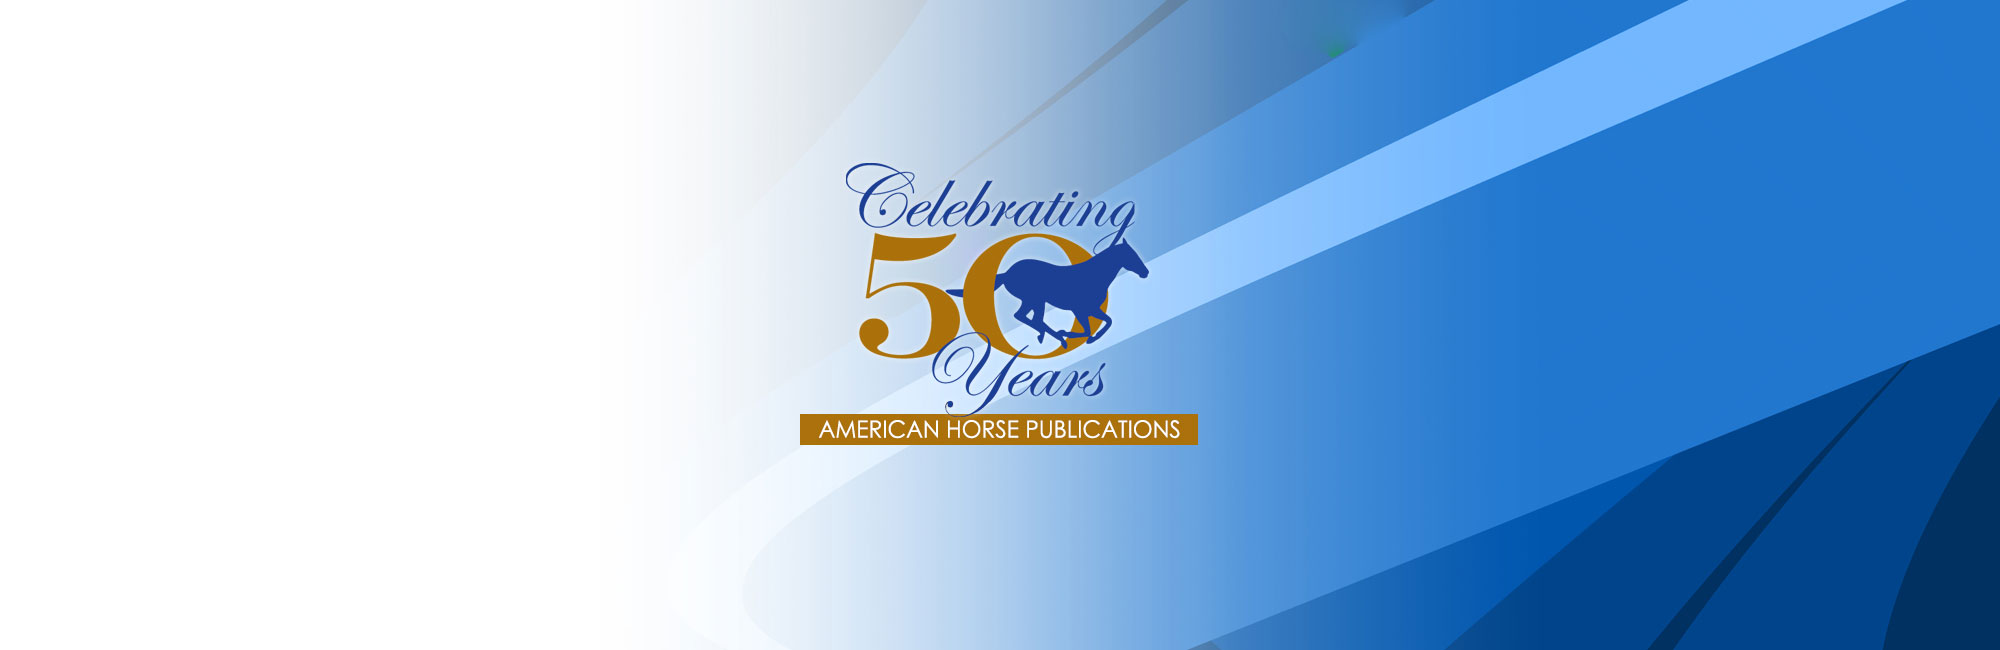 American Horse Publications 50th anniversary